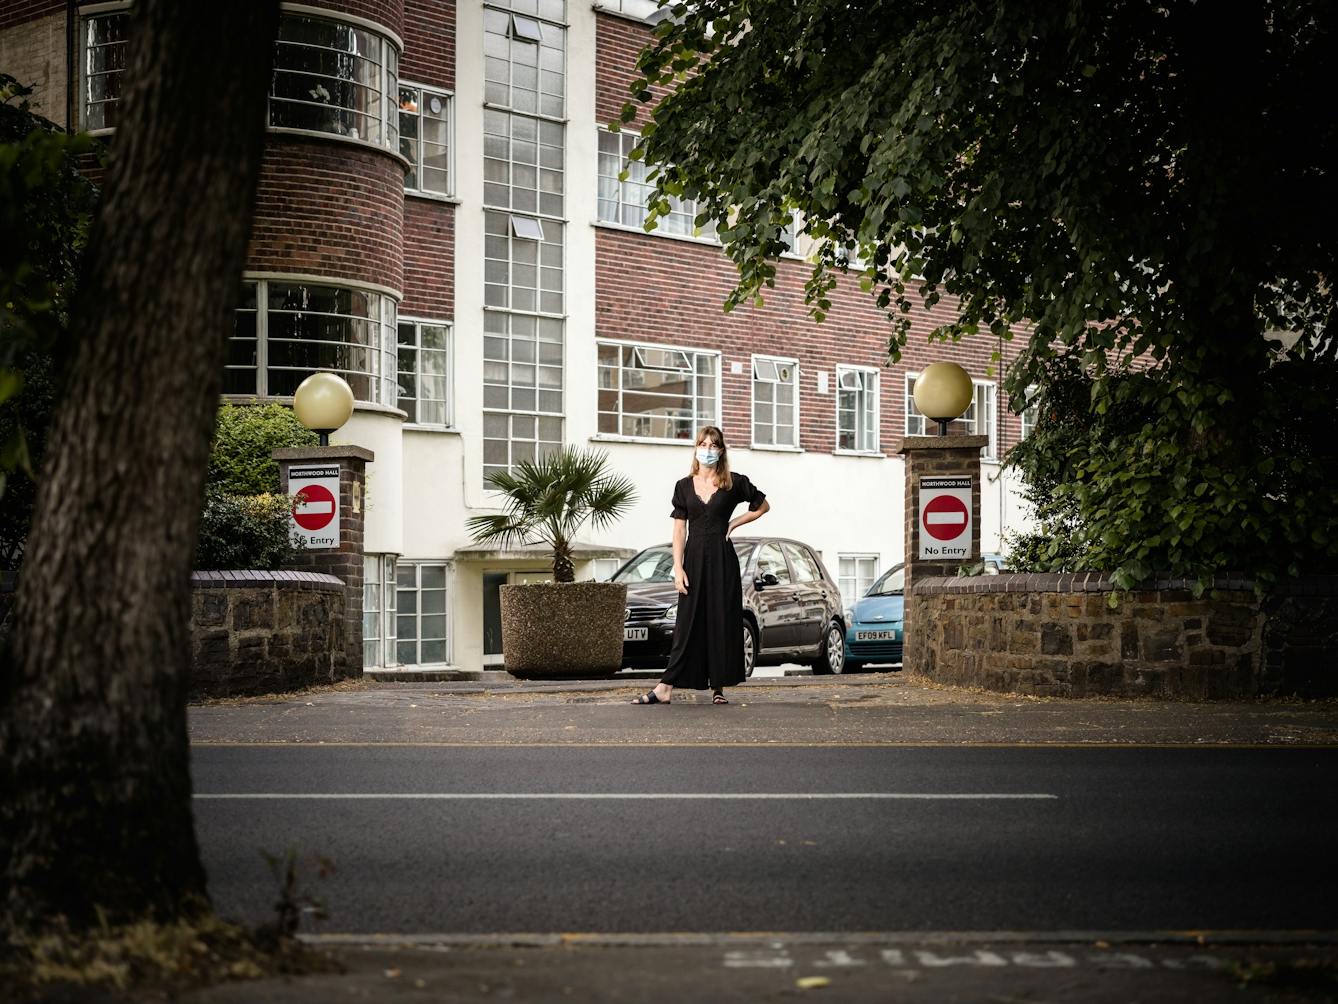 Photograph of a woman in a black dress and wearing a blue face-mask standing in the middle of an exit to a residential building. Two signs displaying the do not enter circle with white dash appear on pillars either side of the exit. The shot is captured from the other side of the road and features the trunk of a tree, the road and part of the pavement in the foreground.